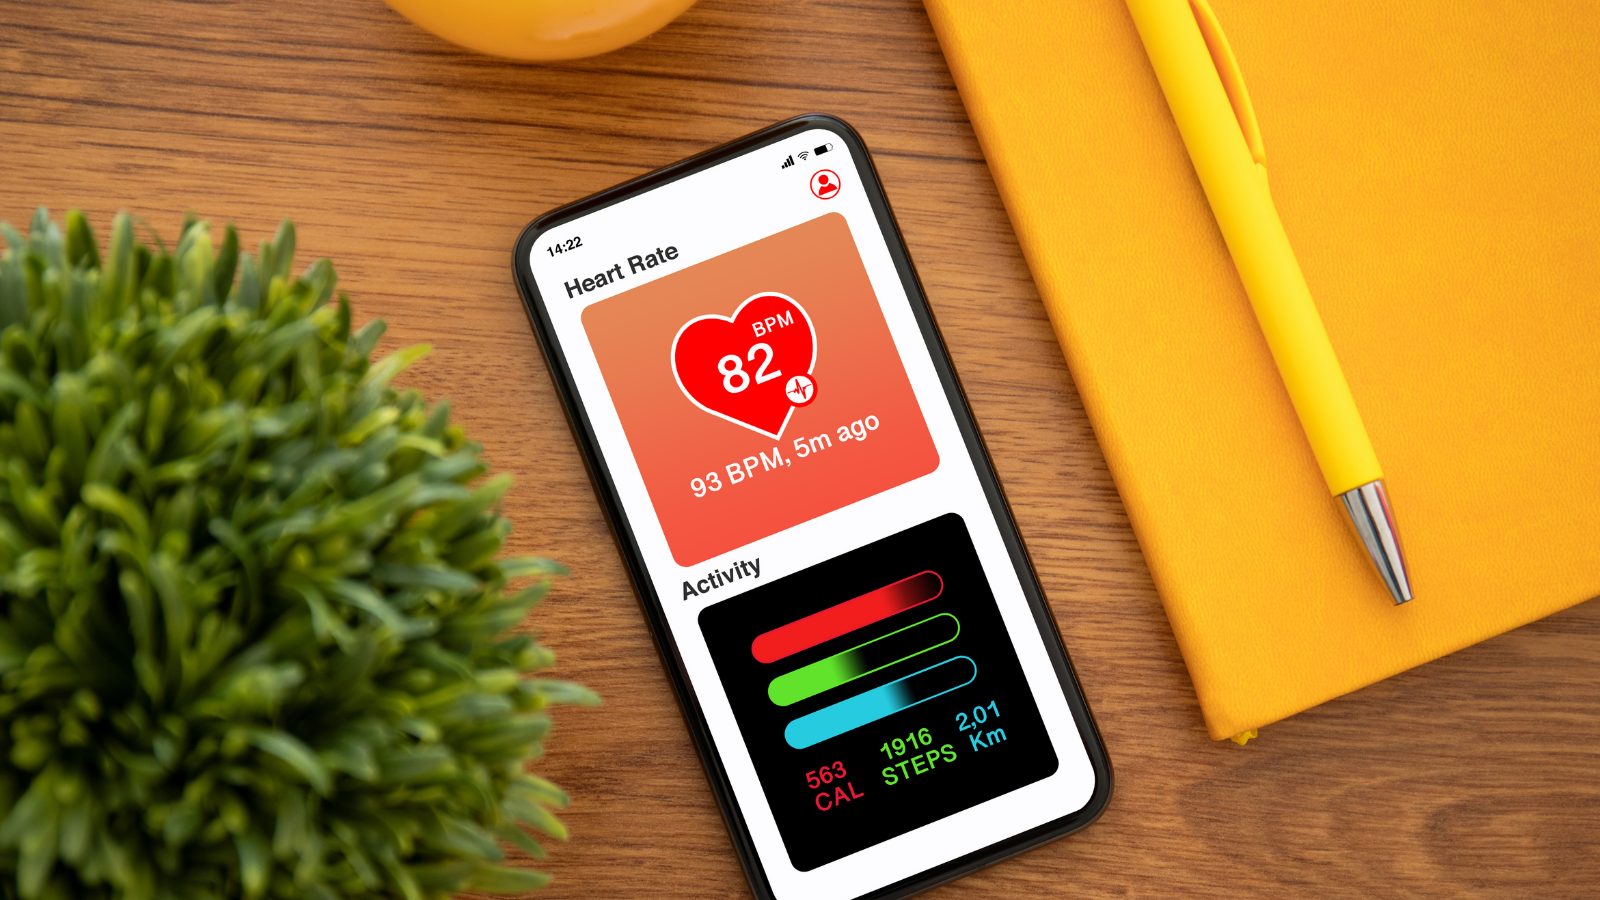 Smartphone with heart monitoring app on screen